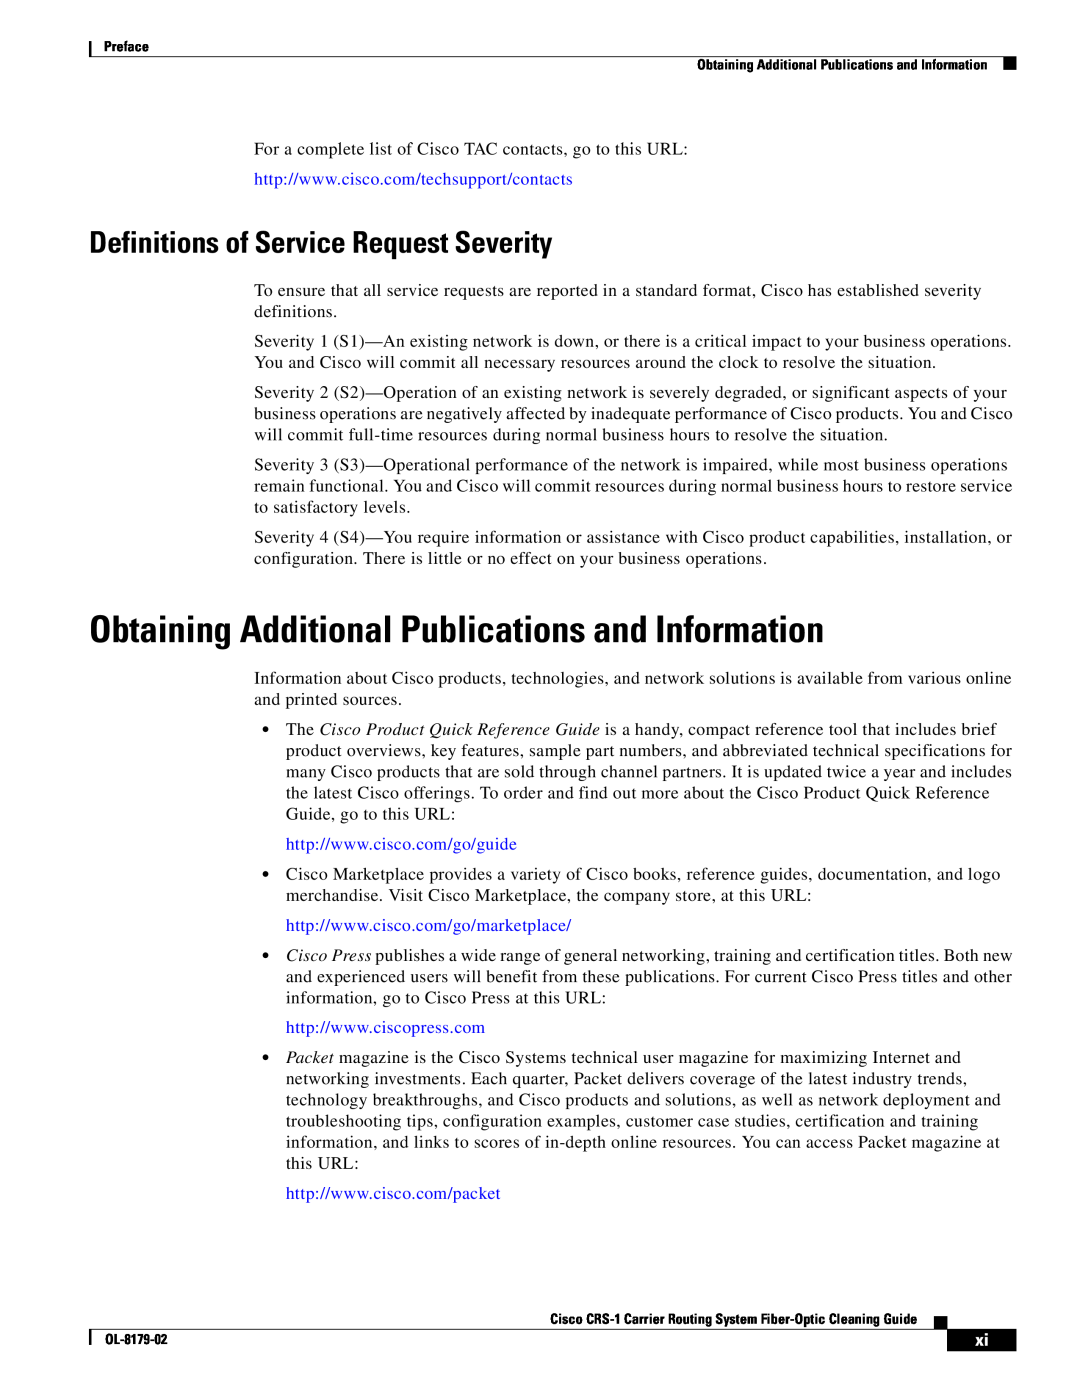 Cisco Systems CRS-1 manual Obtaining Additional Publications and Information, Definitions of Service Request Severity 